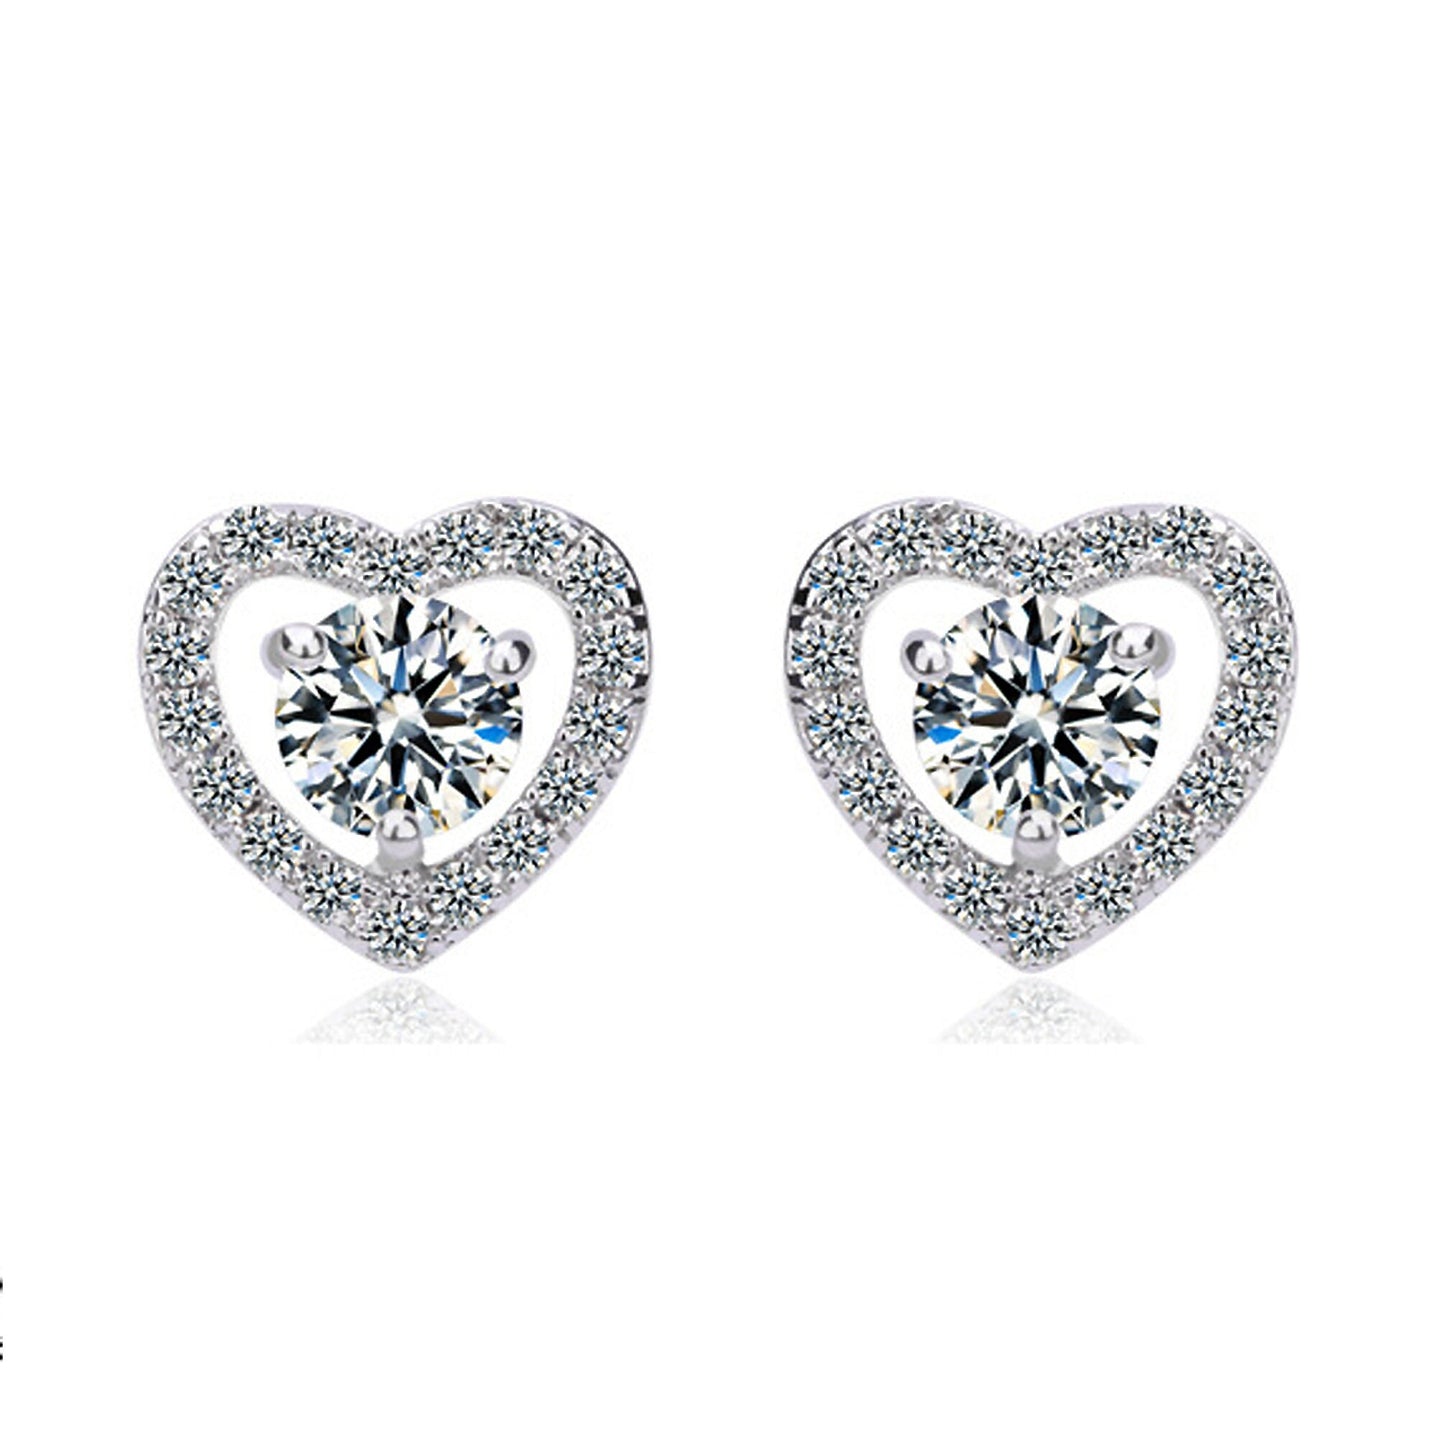 Silver Plated Love Heart and Diamante Stud Earrings or Necklace